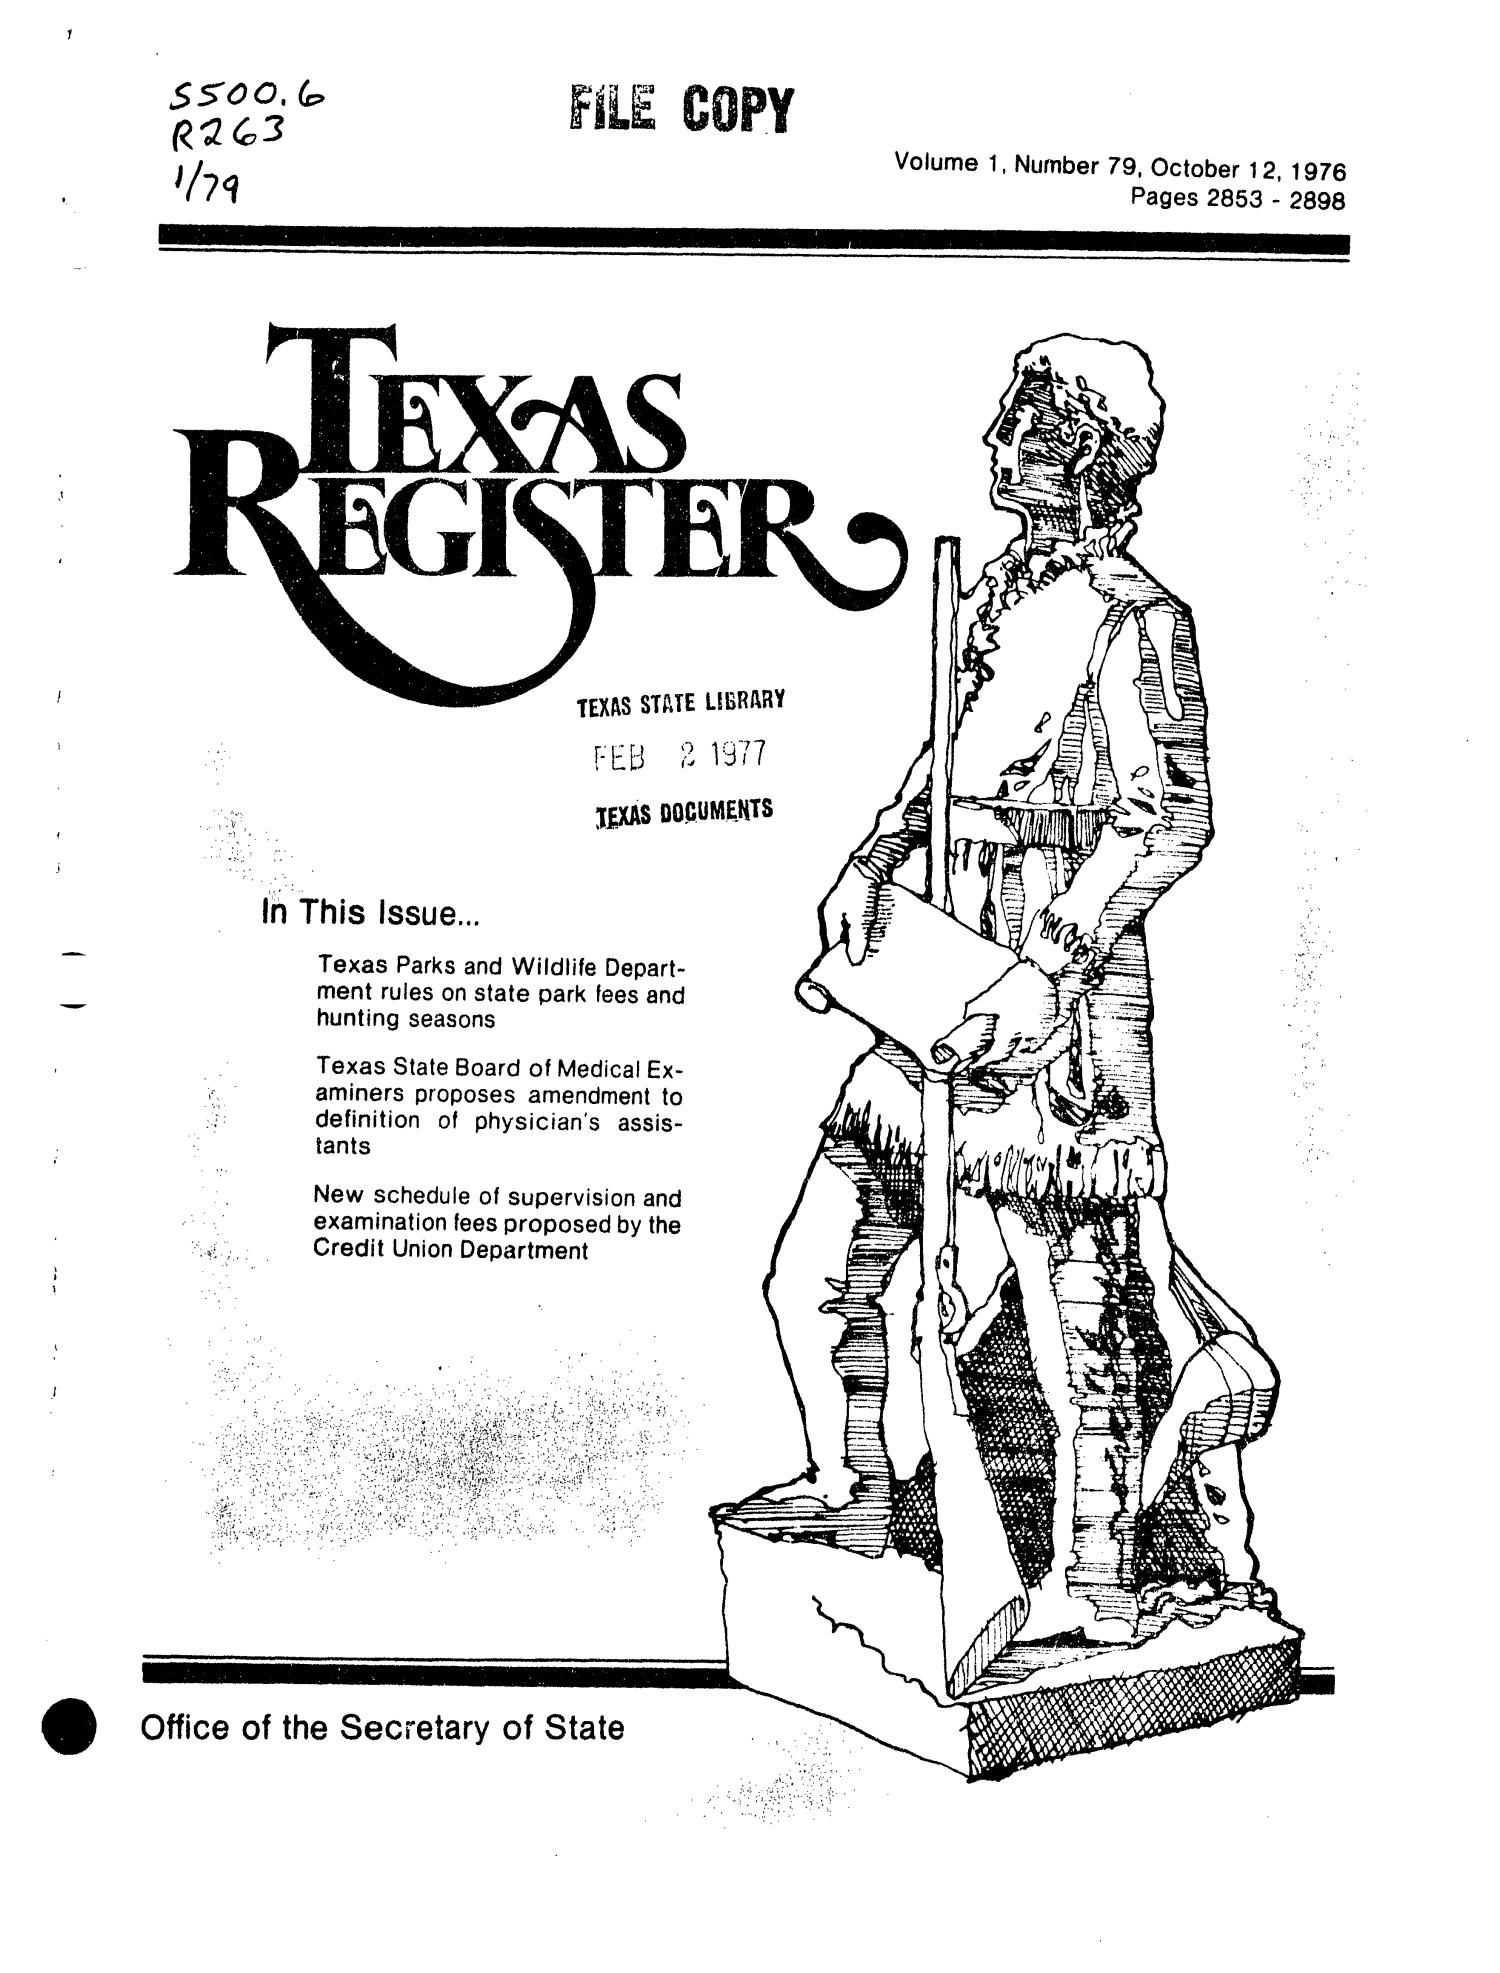 Texas Register, Volume 1, Number 79, Pages 2853-2898, October 12, 1976
                                                
                                                    Title Page
                                                